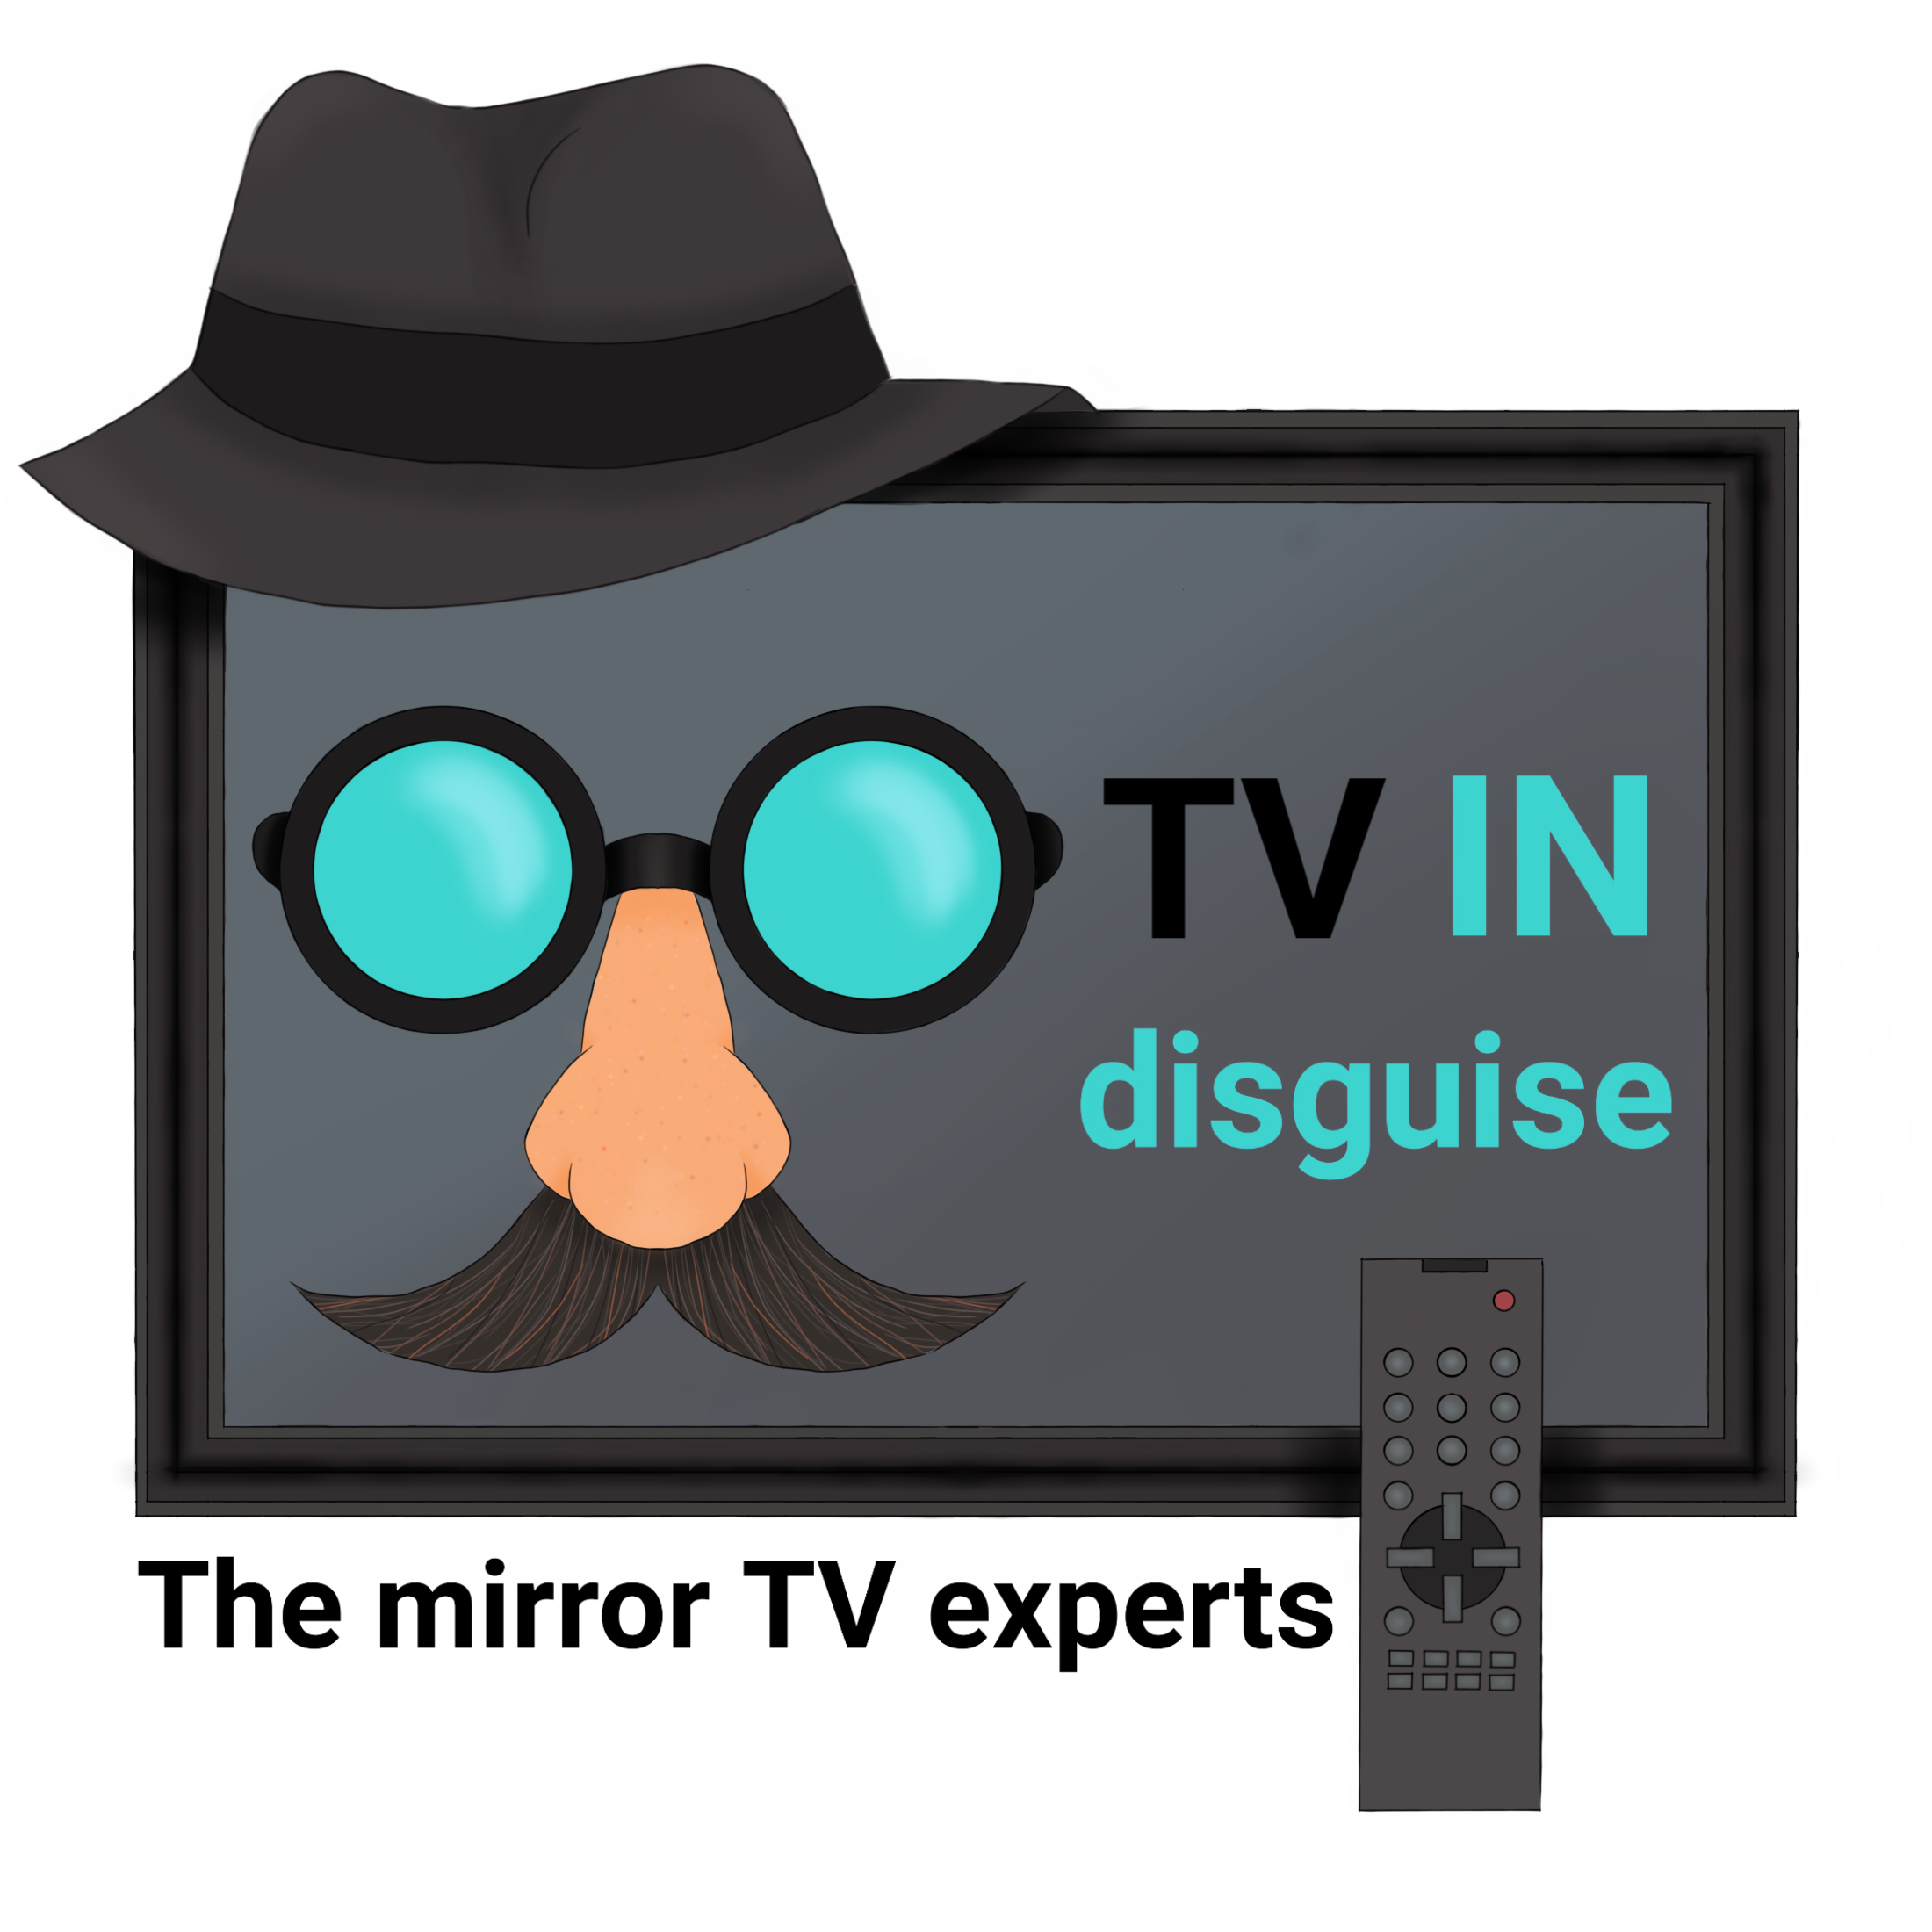 TV IN disguise